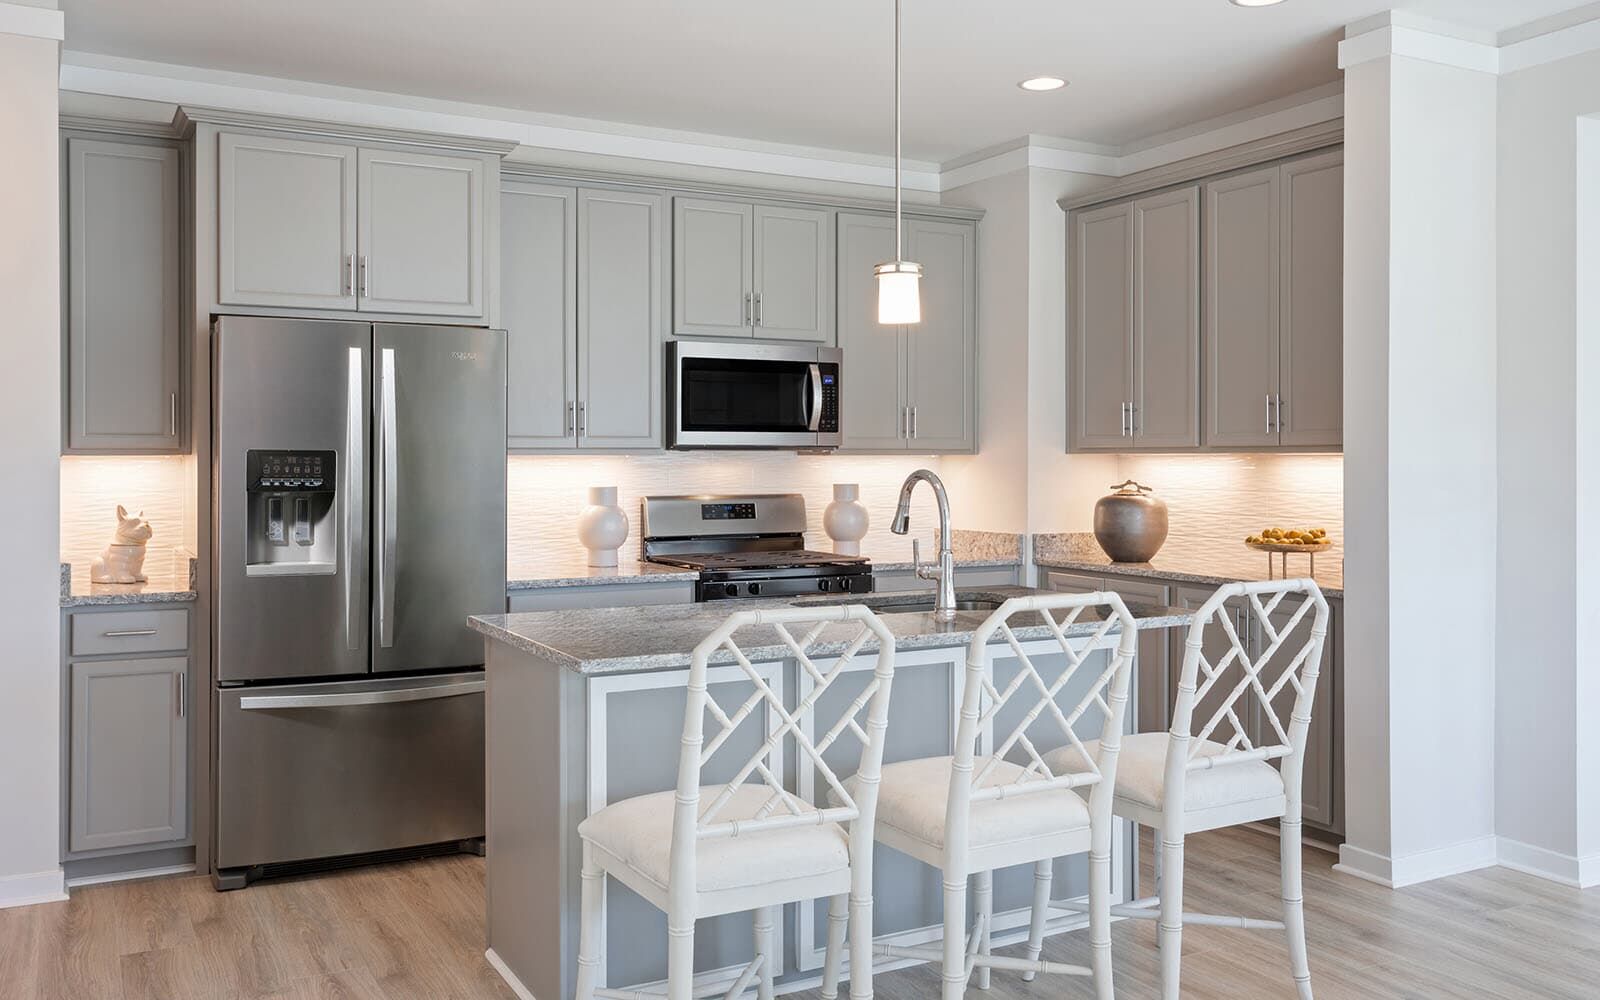 Kitchen:The kitchen of the Dillon villa by Brookfield Residential at Heritage Shores